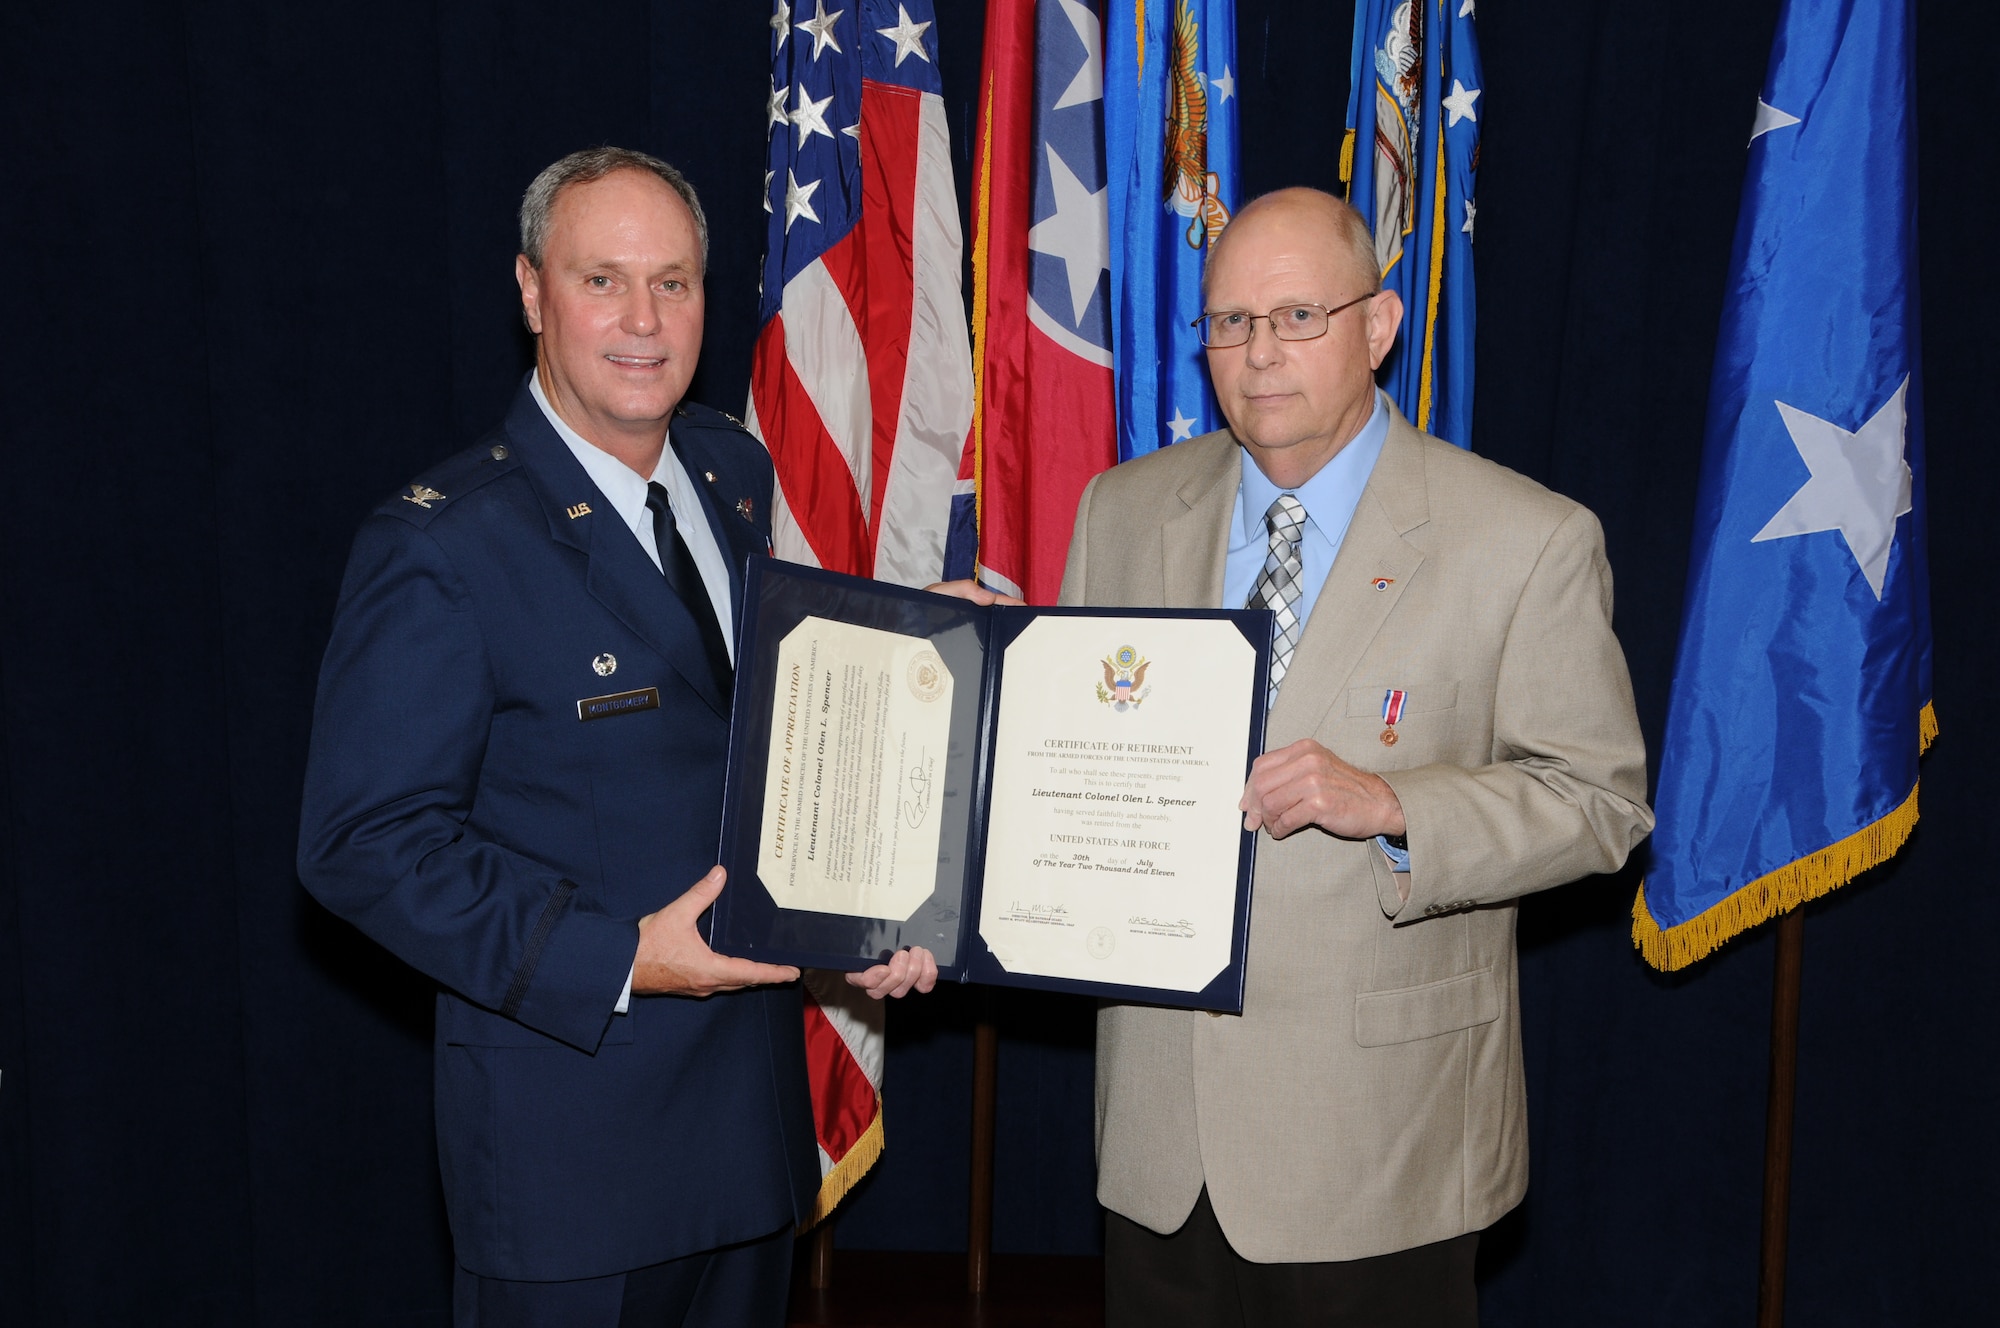 Colonel Harry D. Montgomery, 164th Airlift Wing Commander, presents the Certificate of Retirement to Lieutenant Colonel Lamar Spencer during Col Spencer's retirement ceremony.